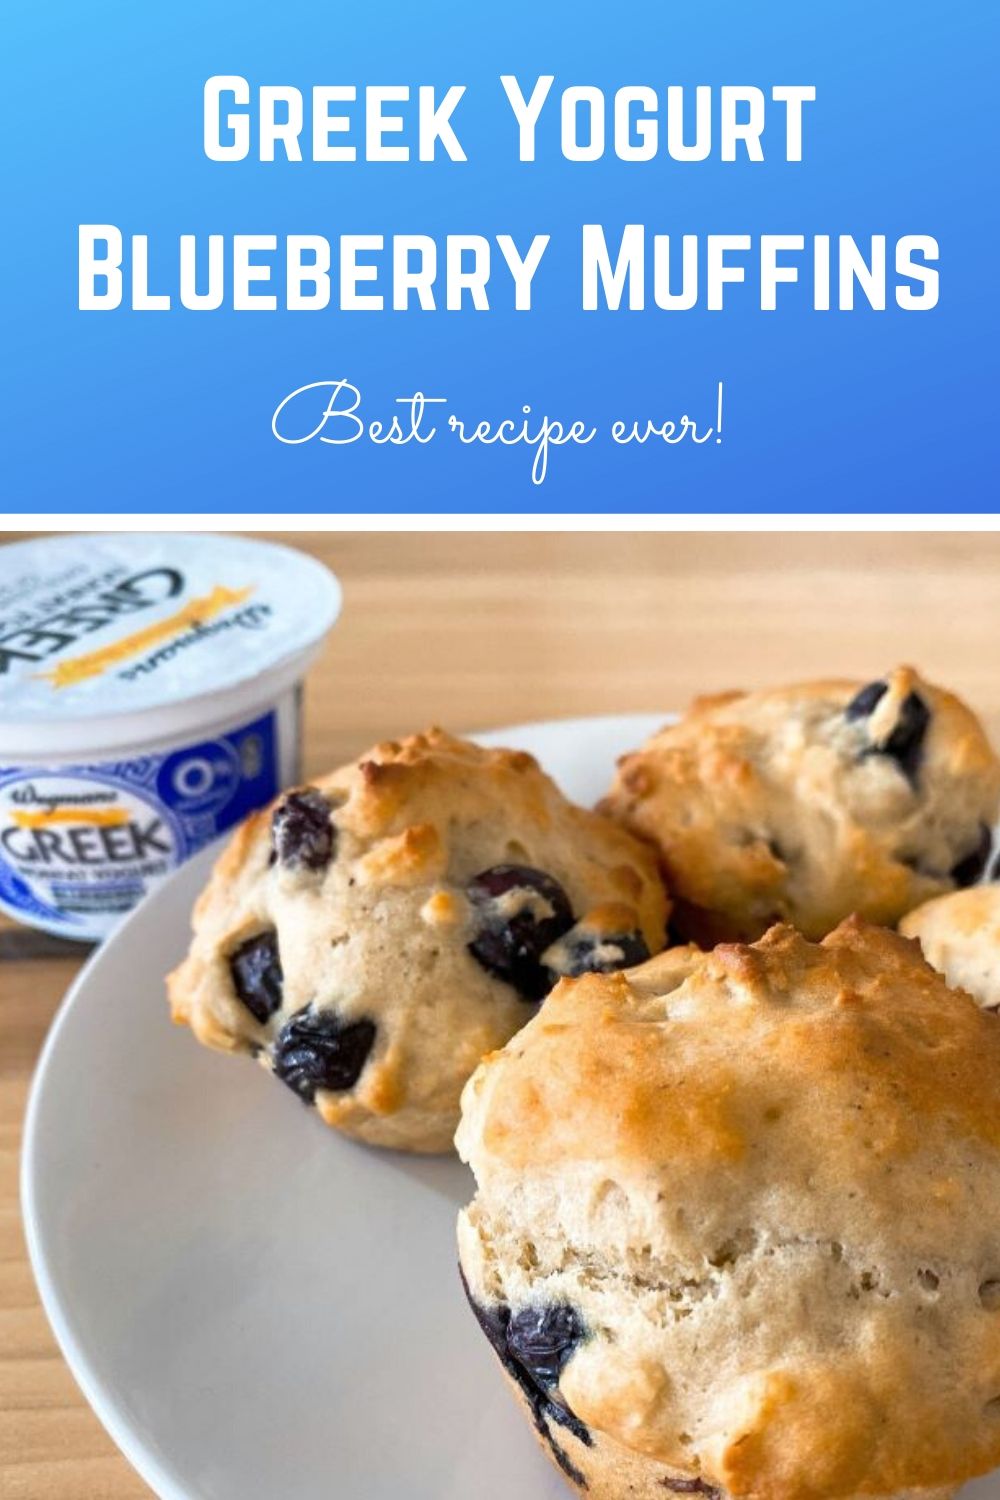 Looking for an easy blueberry muffins recipe? Want to make healthy blueberry muffins? This homemade blueberry muffins recipe with Greek yogurt makes moist blueberry muffins that taste even better than Starbucks blueberry muffins. This made from scratch blueberry muffin recipe will quickly become a family favorite! It's a great make-ahead brunch recipe, too! 